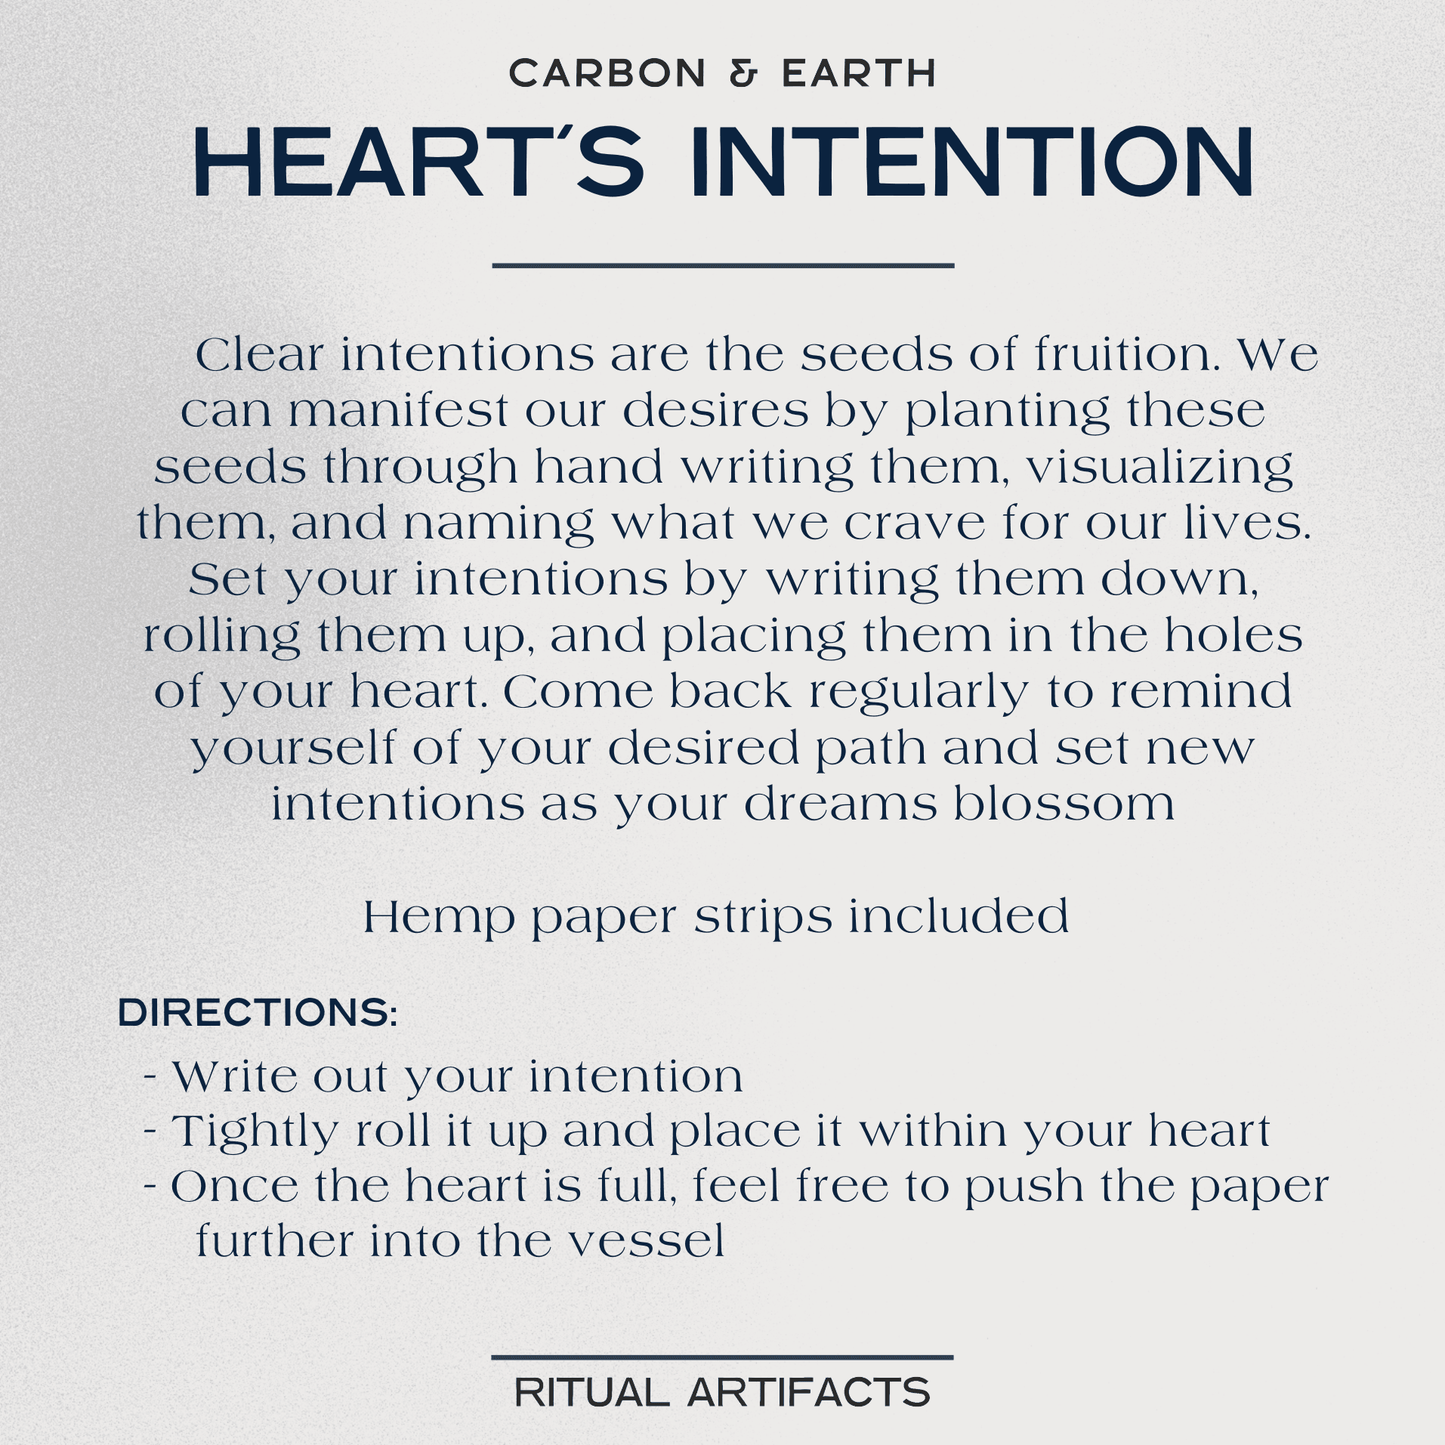 Heart's Intentions - Carbon and Earth